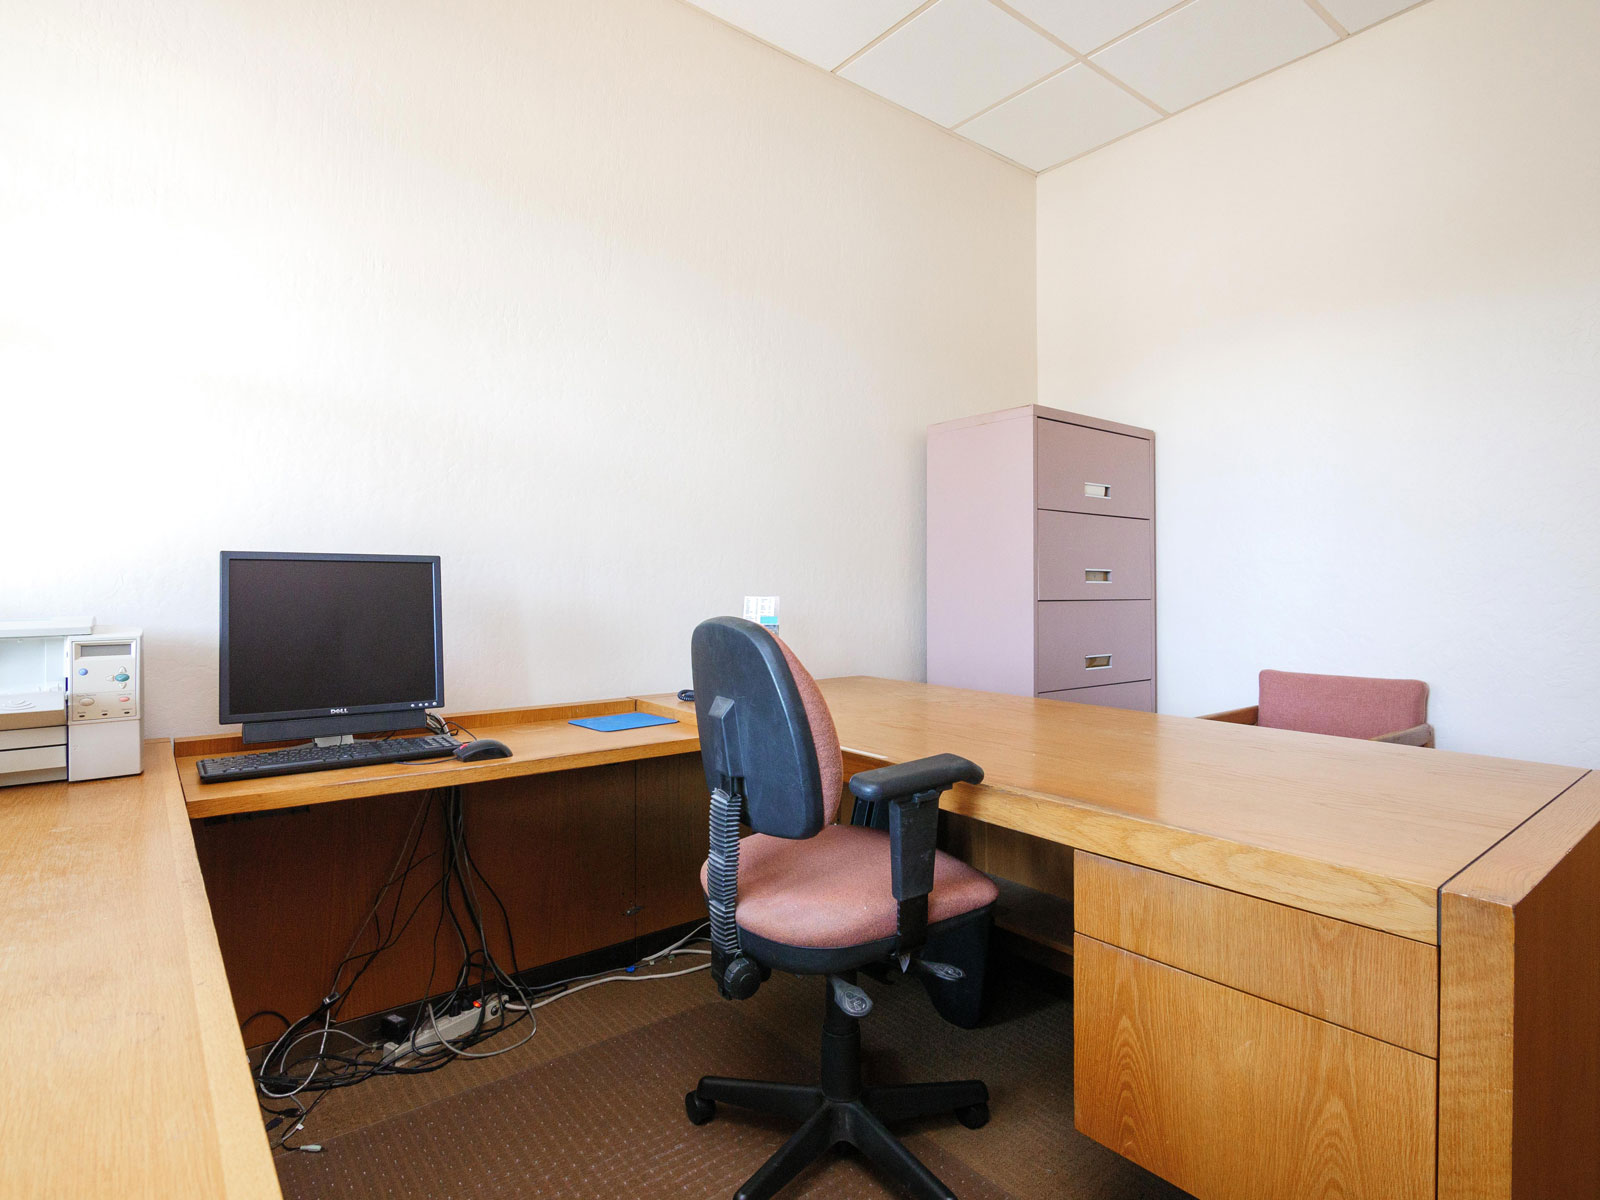 316-s-melrose-vista-ca-executive-office-for-lease-203-1